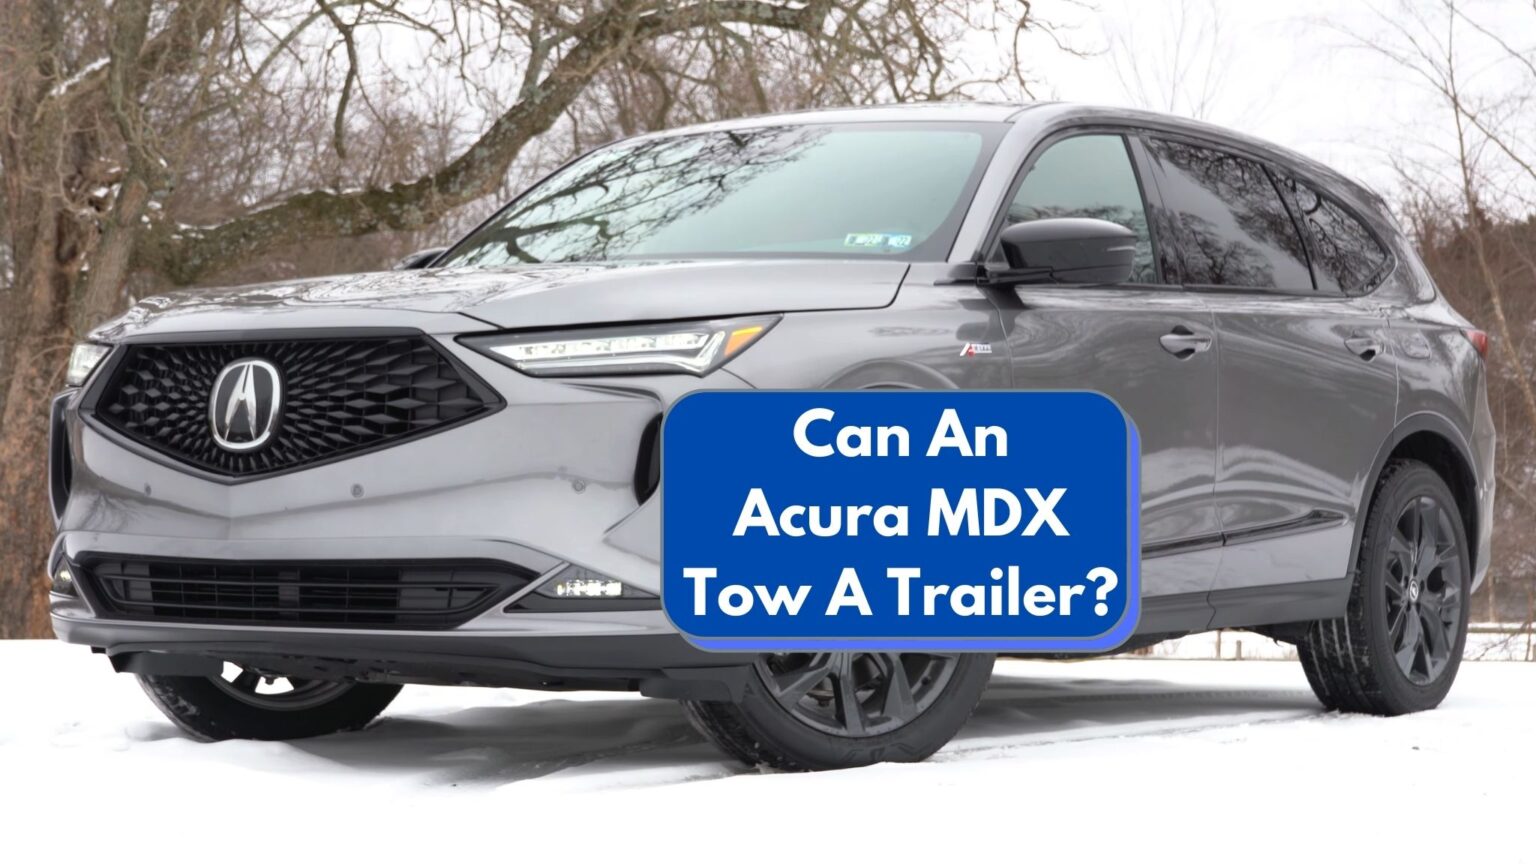 Can An Acura MDX Tow A Trailer? Acura MDX Towing Capacity